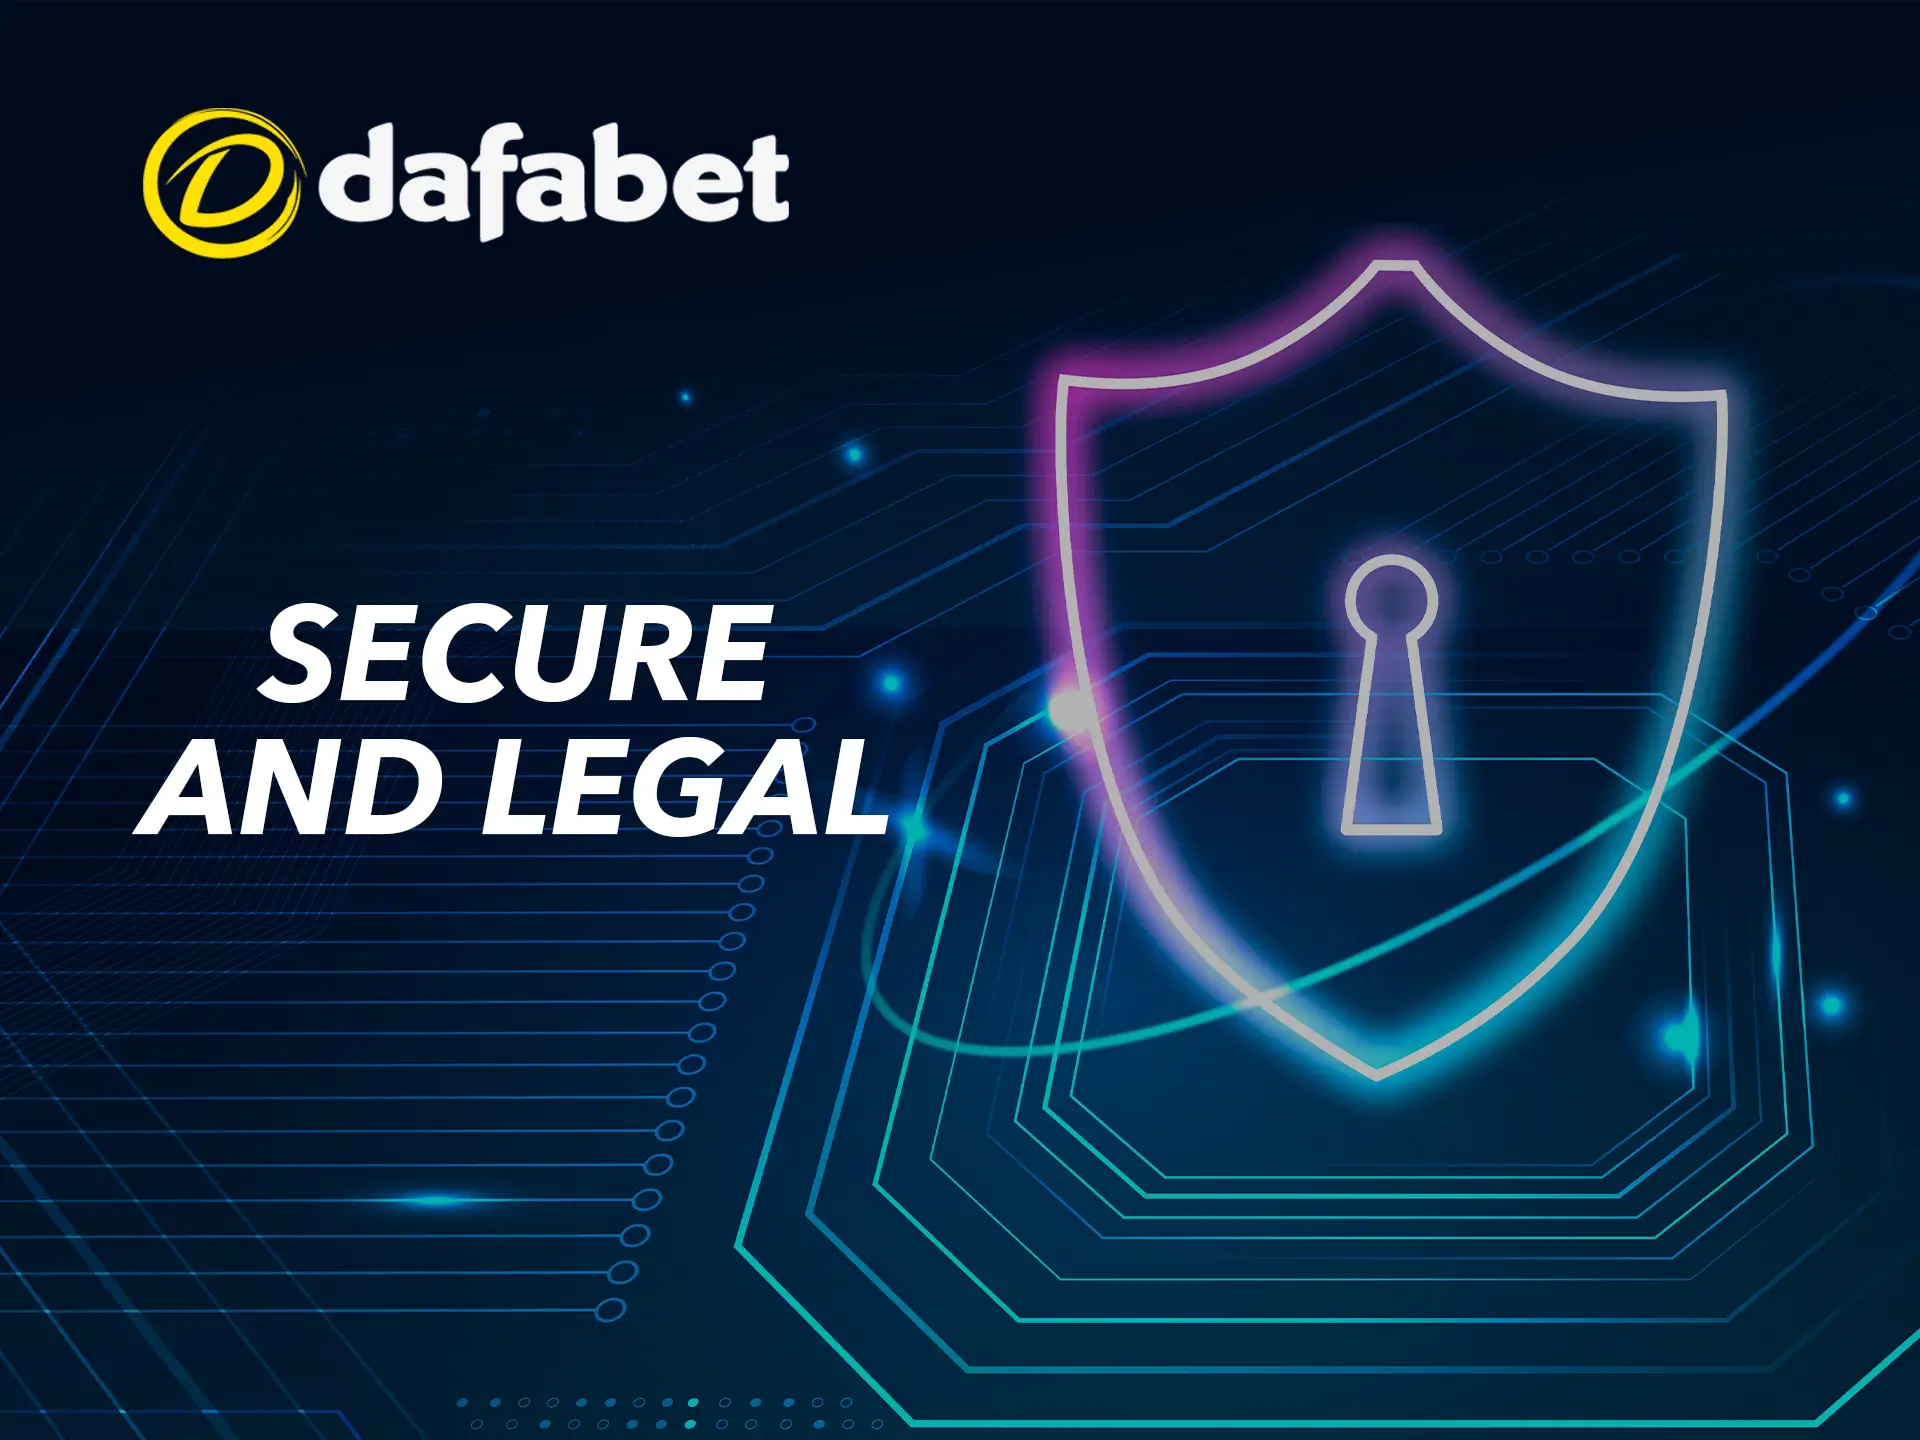 Dafabet's legality is confirmed by a Curacao licence.